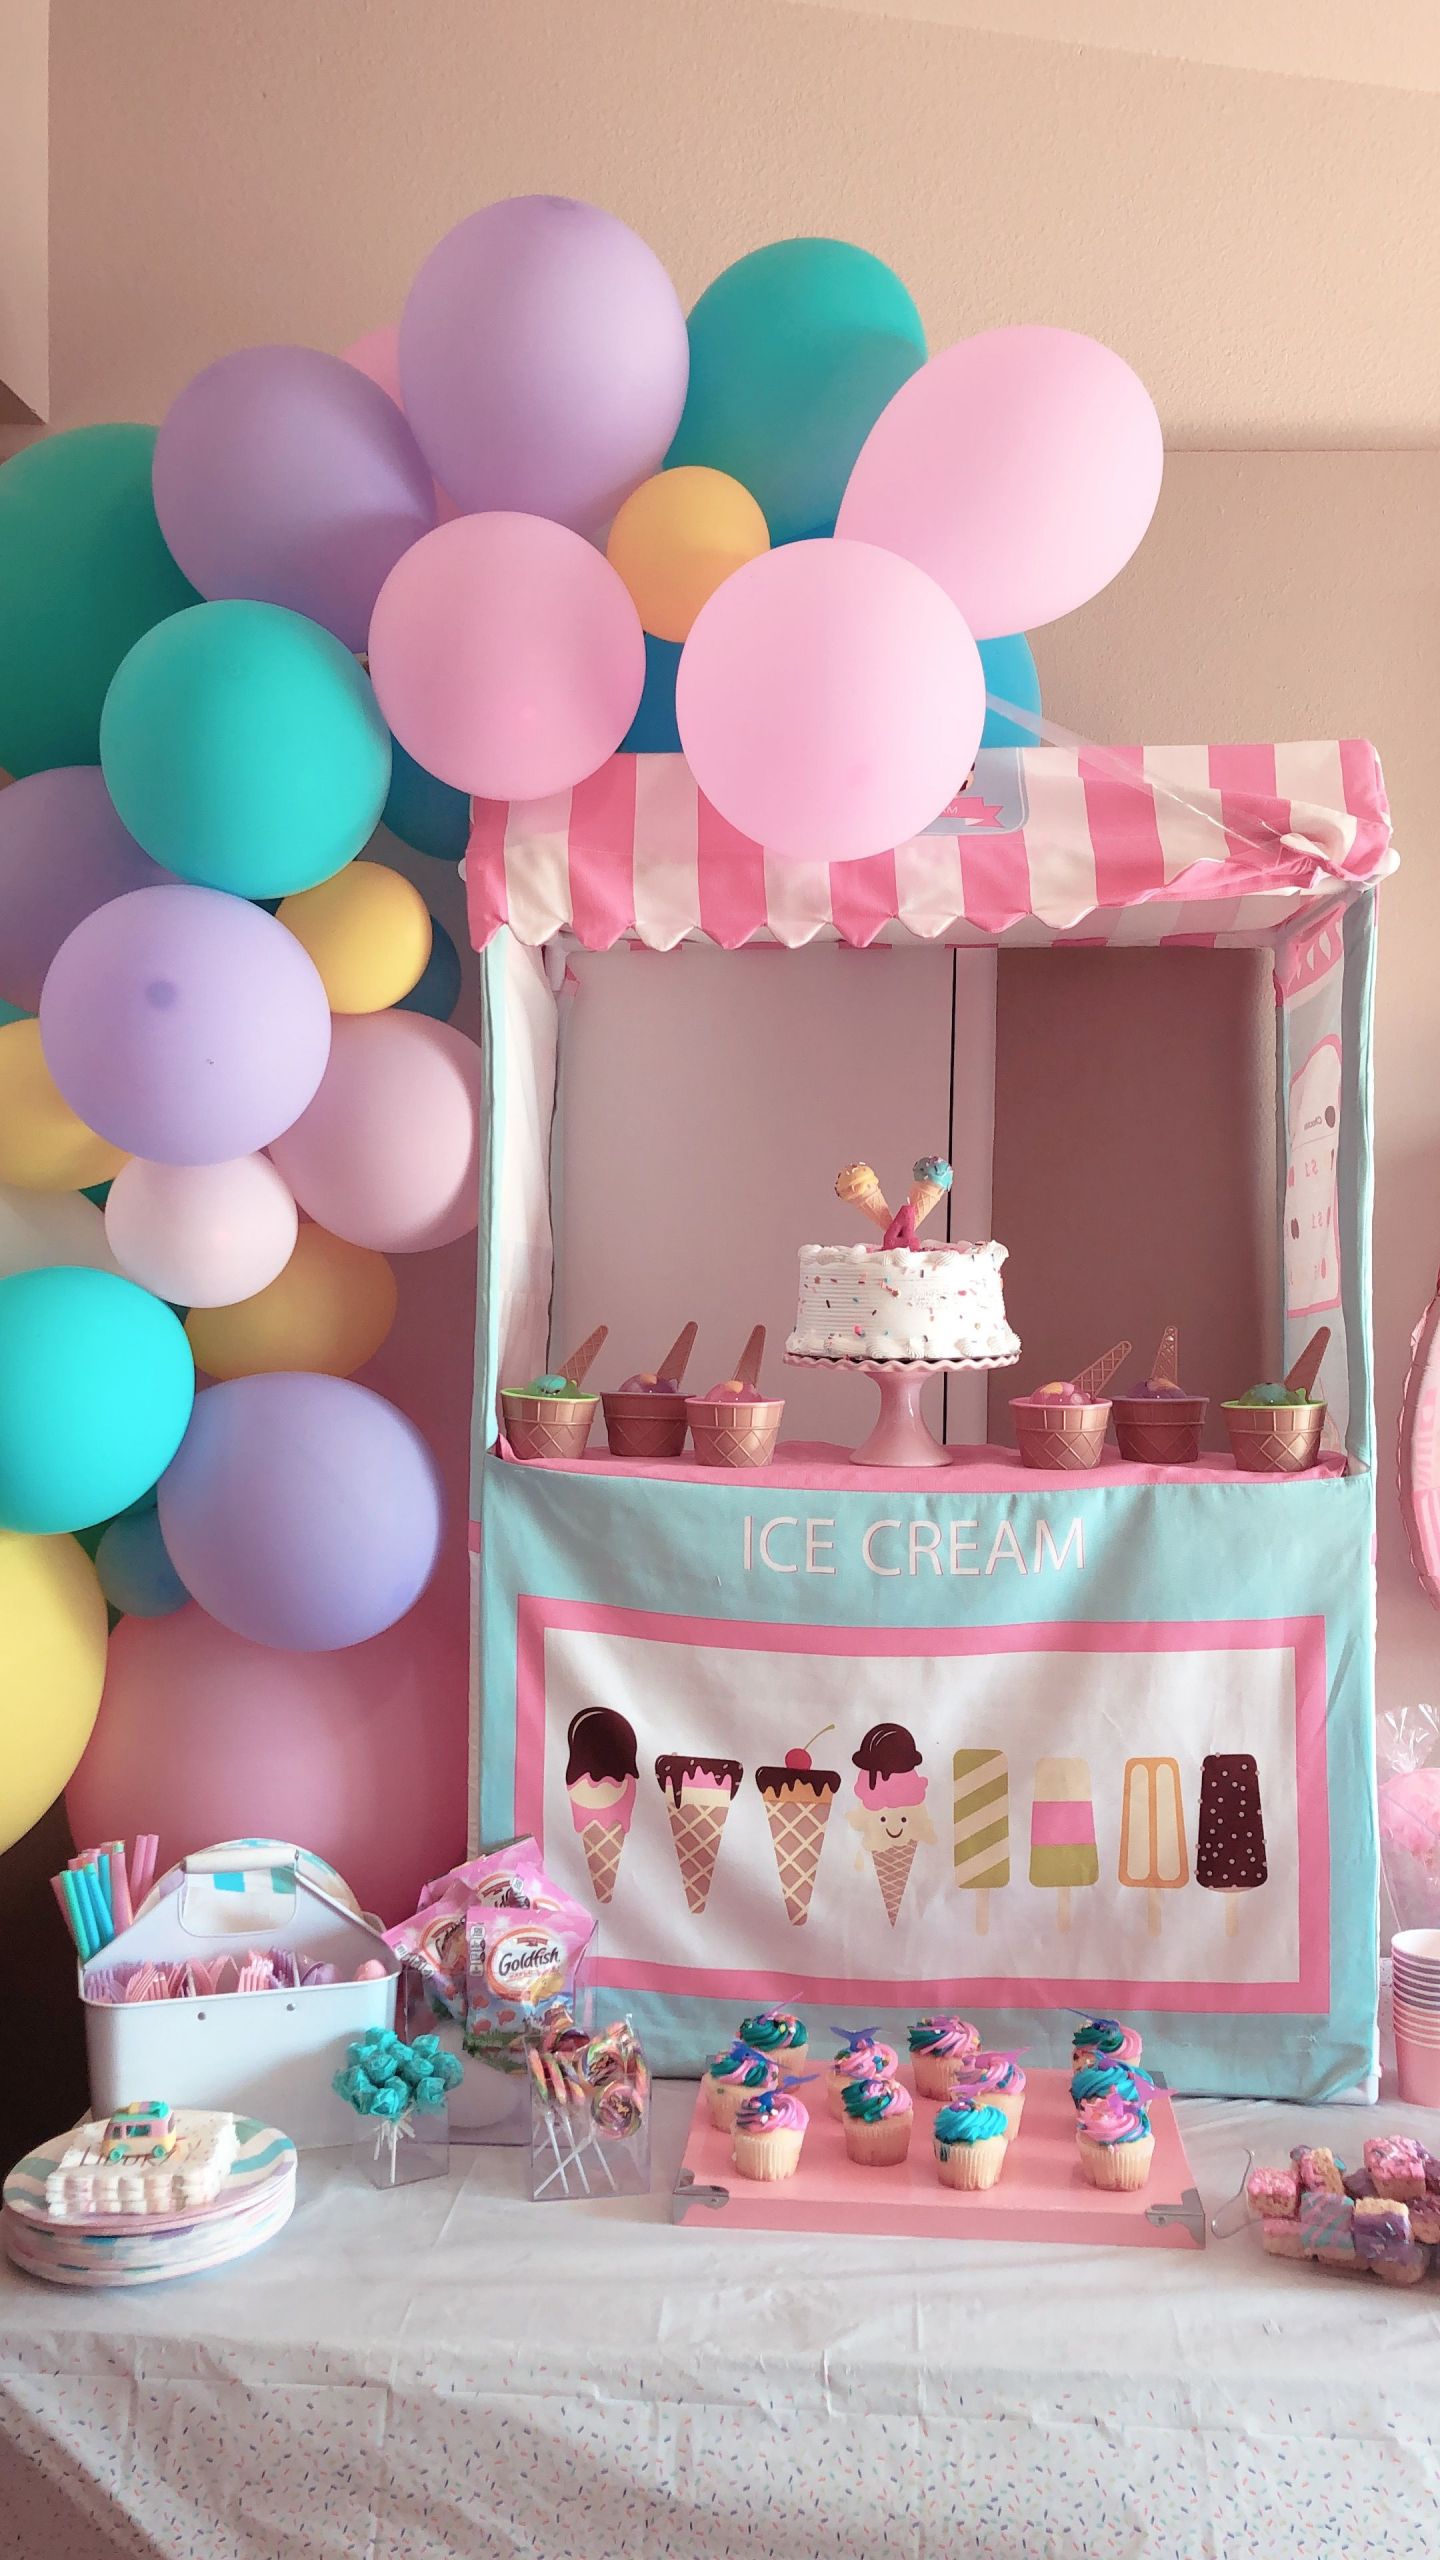 Two Years Old Birthday Party Ideas
 Ice cream birthday party for my 4 year old in 2019